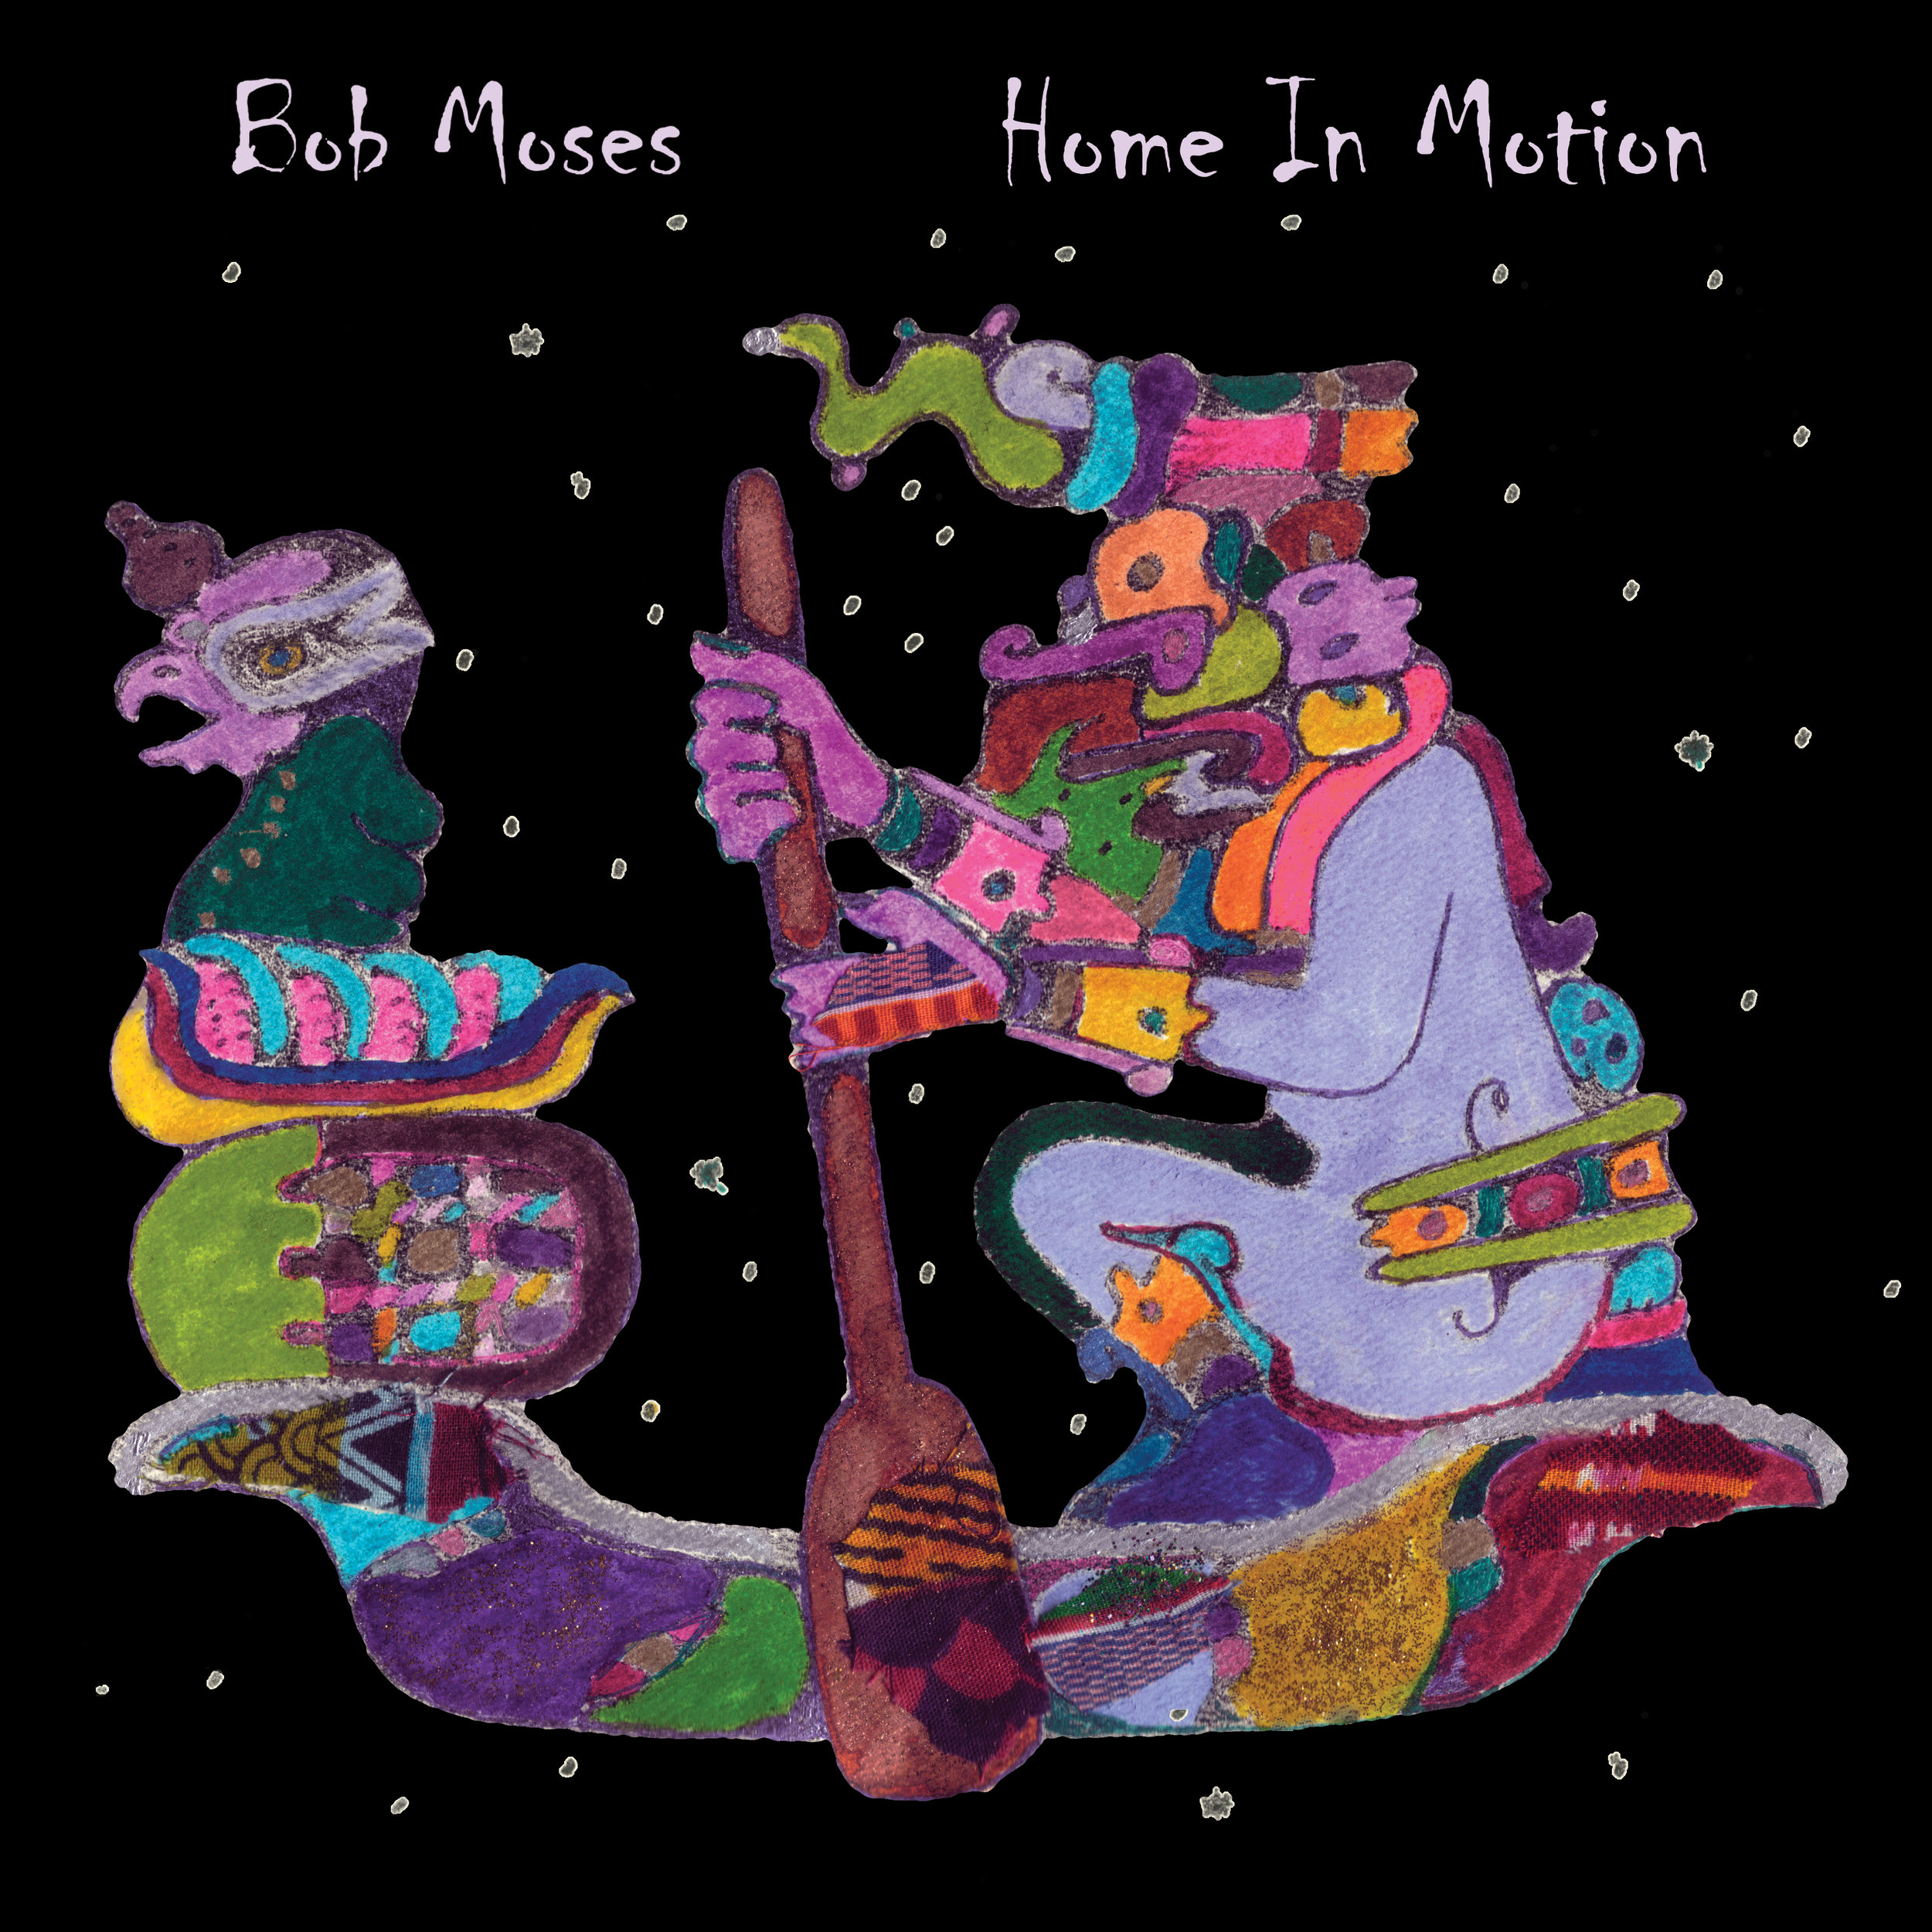   HOME IN MOTION    Compact Disc -    E-mail your order     Digital Downloads -    Amazon     Recorded - 1979    Release date - 2013    Label - Ra-Kalam Records    Tom Harrell - Trumpet    Harold Vick - Tenor sax, flute    Richard Perry - Tenor &amp;